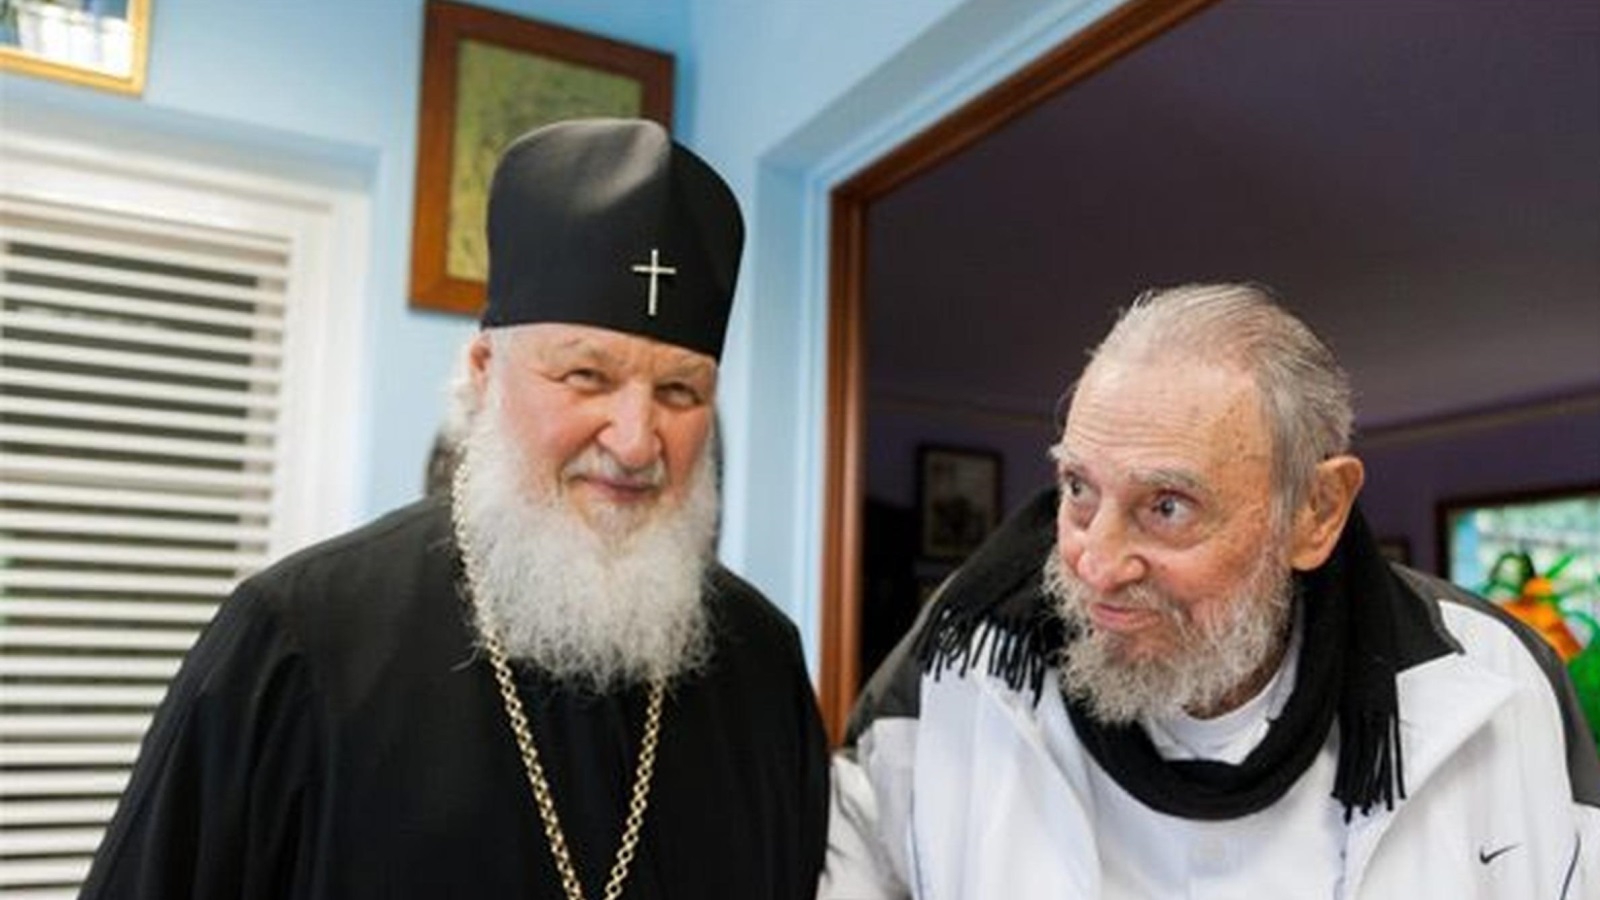 (FILE) A file handout picture provided by Cuban daily Juventud Rebelde on 14 February 2016 shows Russian Orthodox Patriarch Kirill (L) meeting with Cuban leader Fidel Castro (R) in Havana, Cuba, 13 February 2016. According to a Cuban state TV broadcast, Cuban former President Fidel Castro has died at the age of 90 on 25 November 2016.  EPA/ALEX CASTRO/JUVENTUD REBELDE/HANDOUT